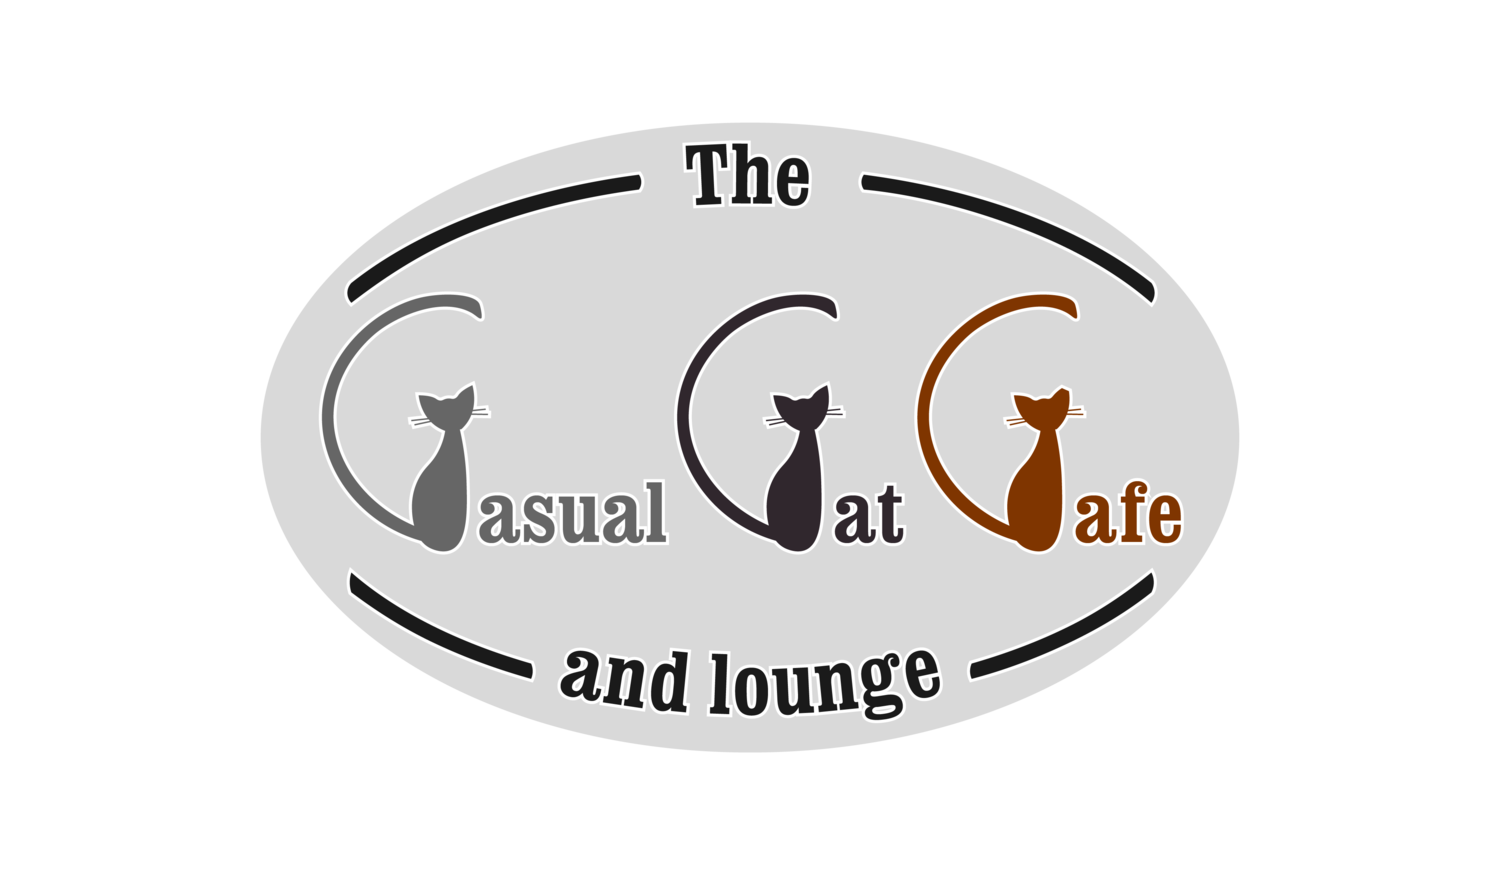 TheCasualCatCafe